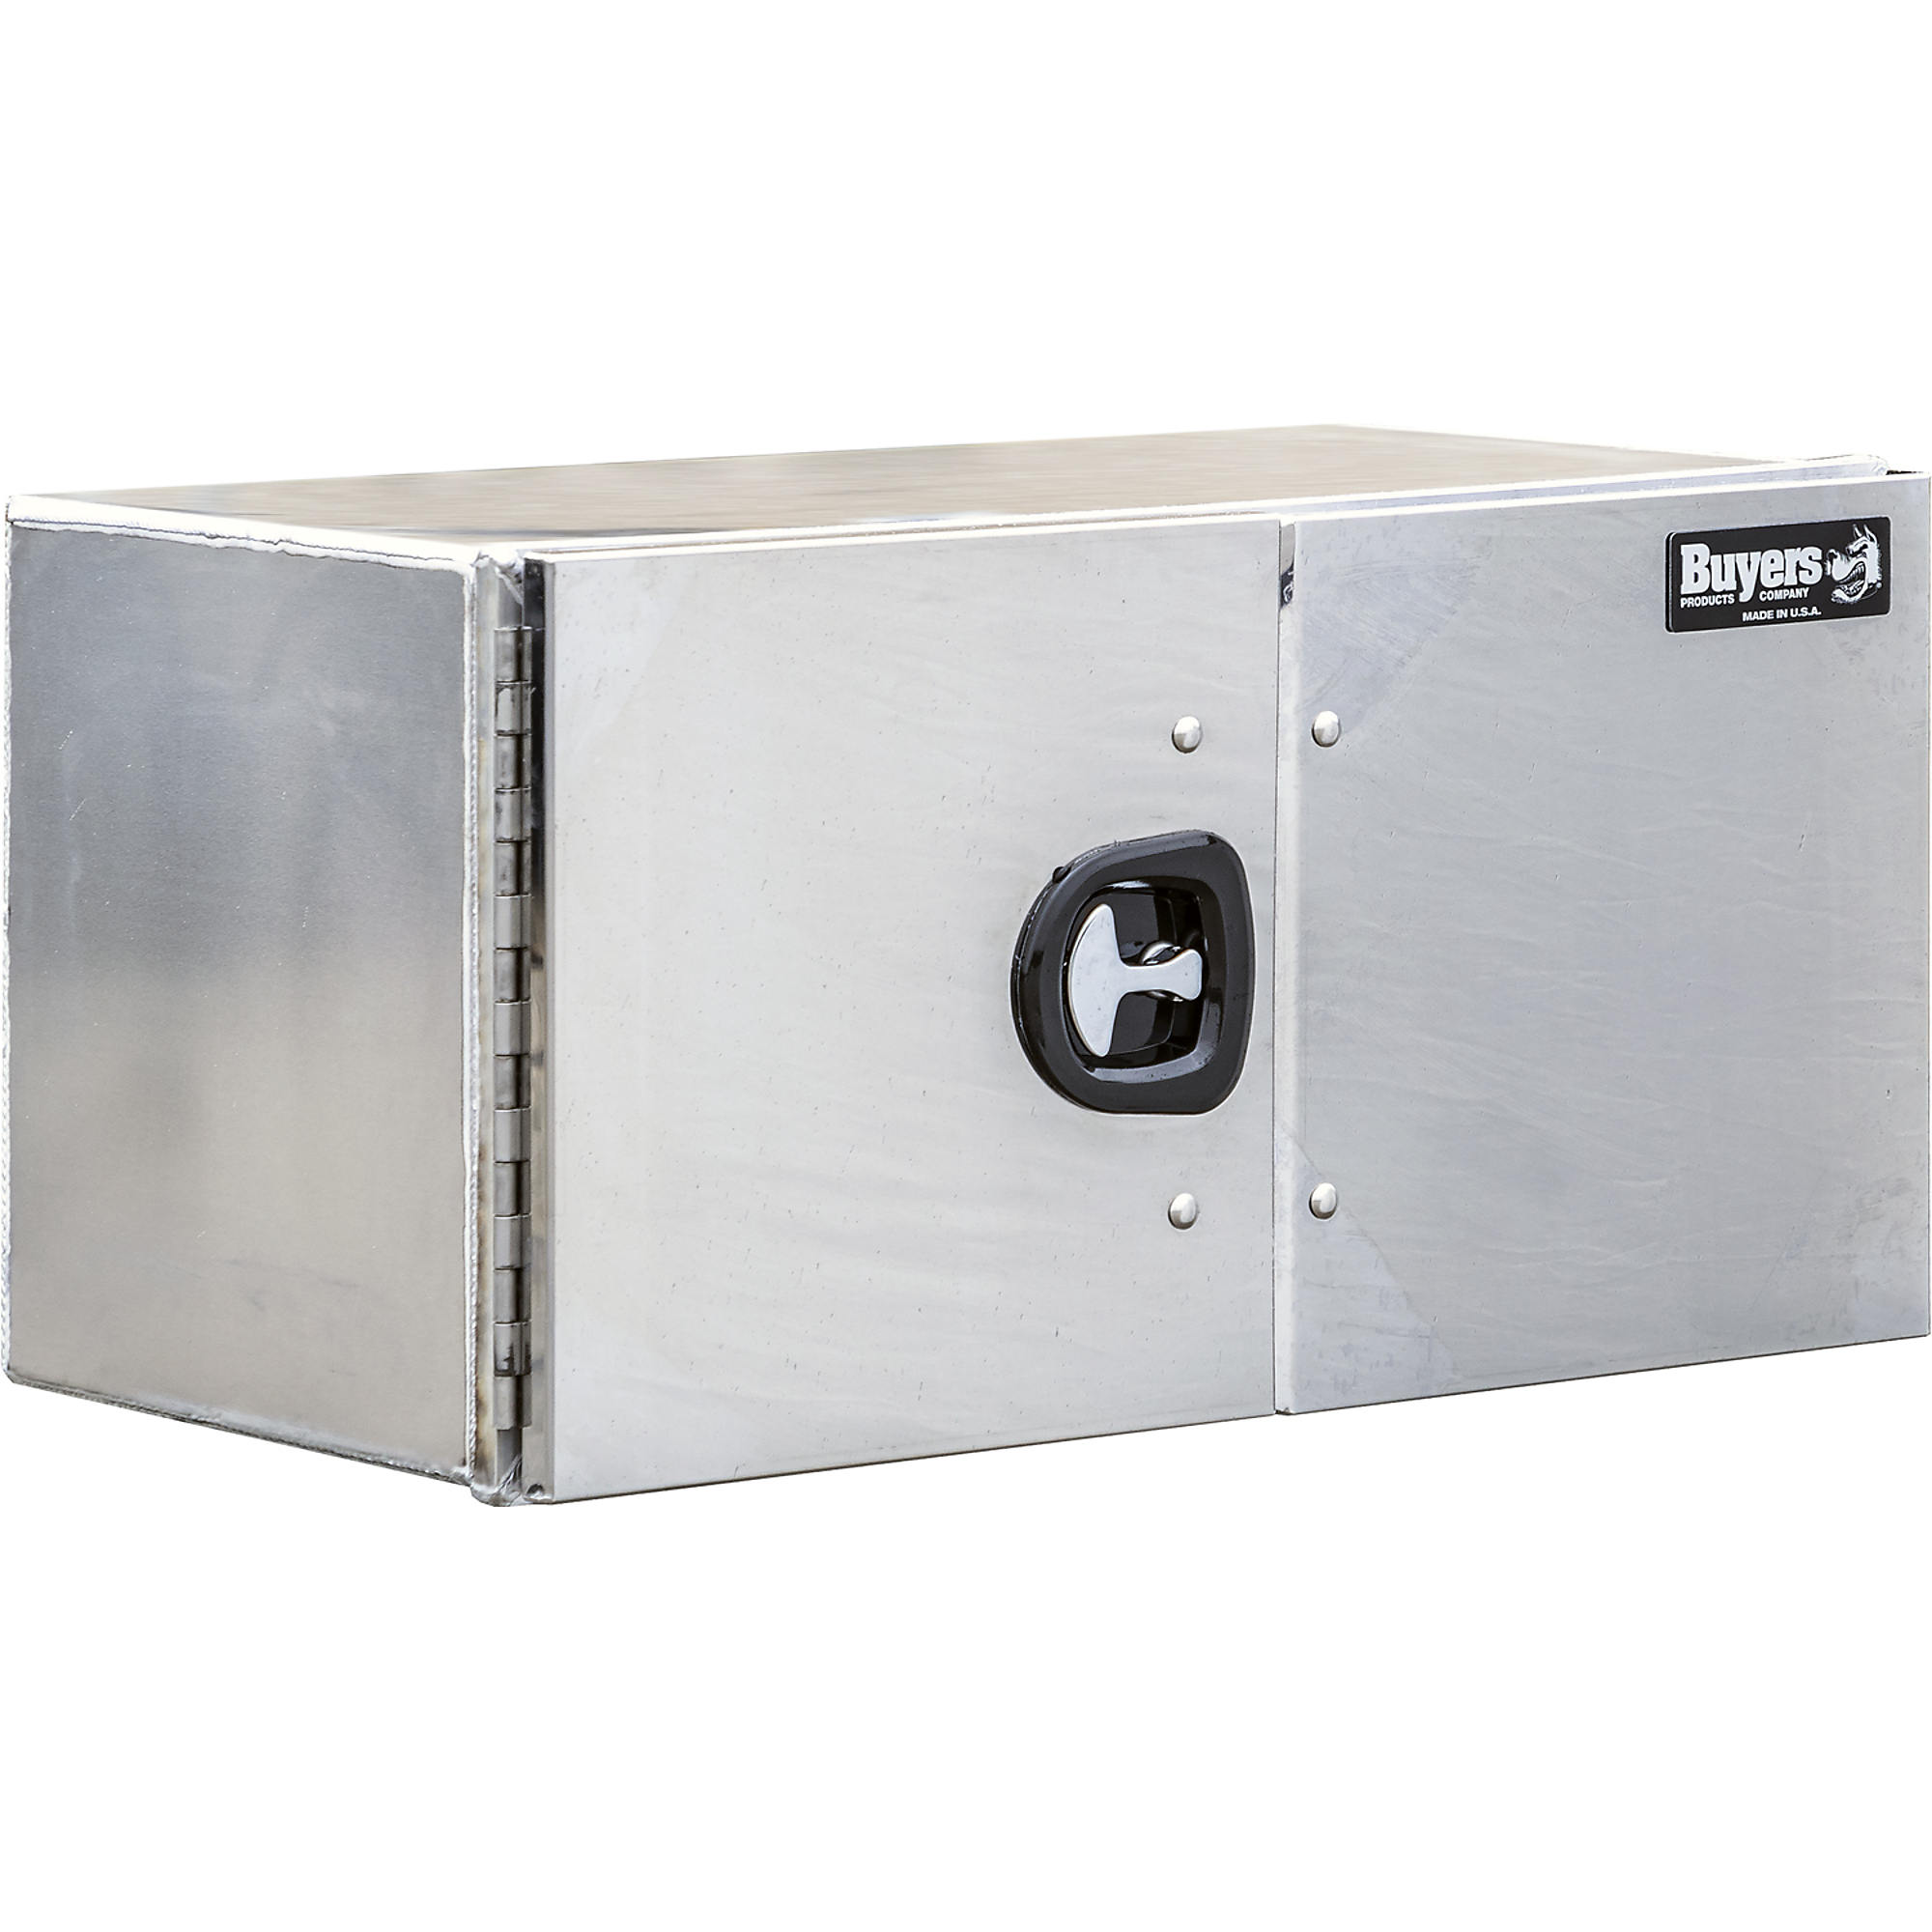 Buyers Products, 24x24x48 Aluminum Barn Door Underbody Truck Box, Width 24 in, Material Aluminum, Color Finish Smooth Silver, Model 1705580